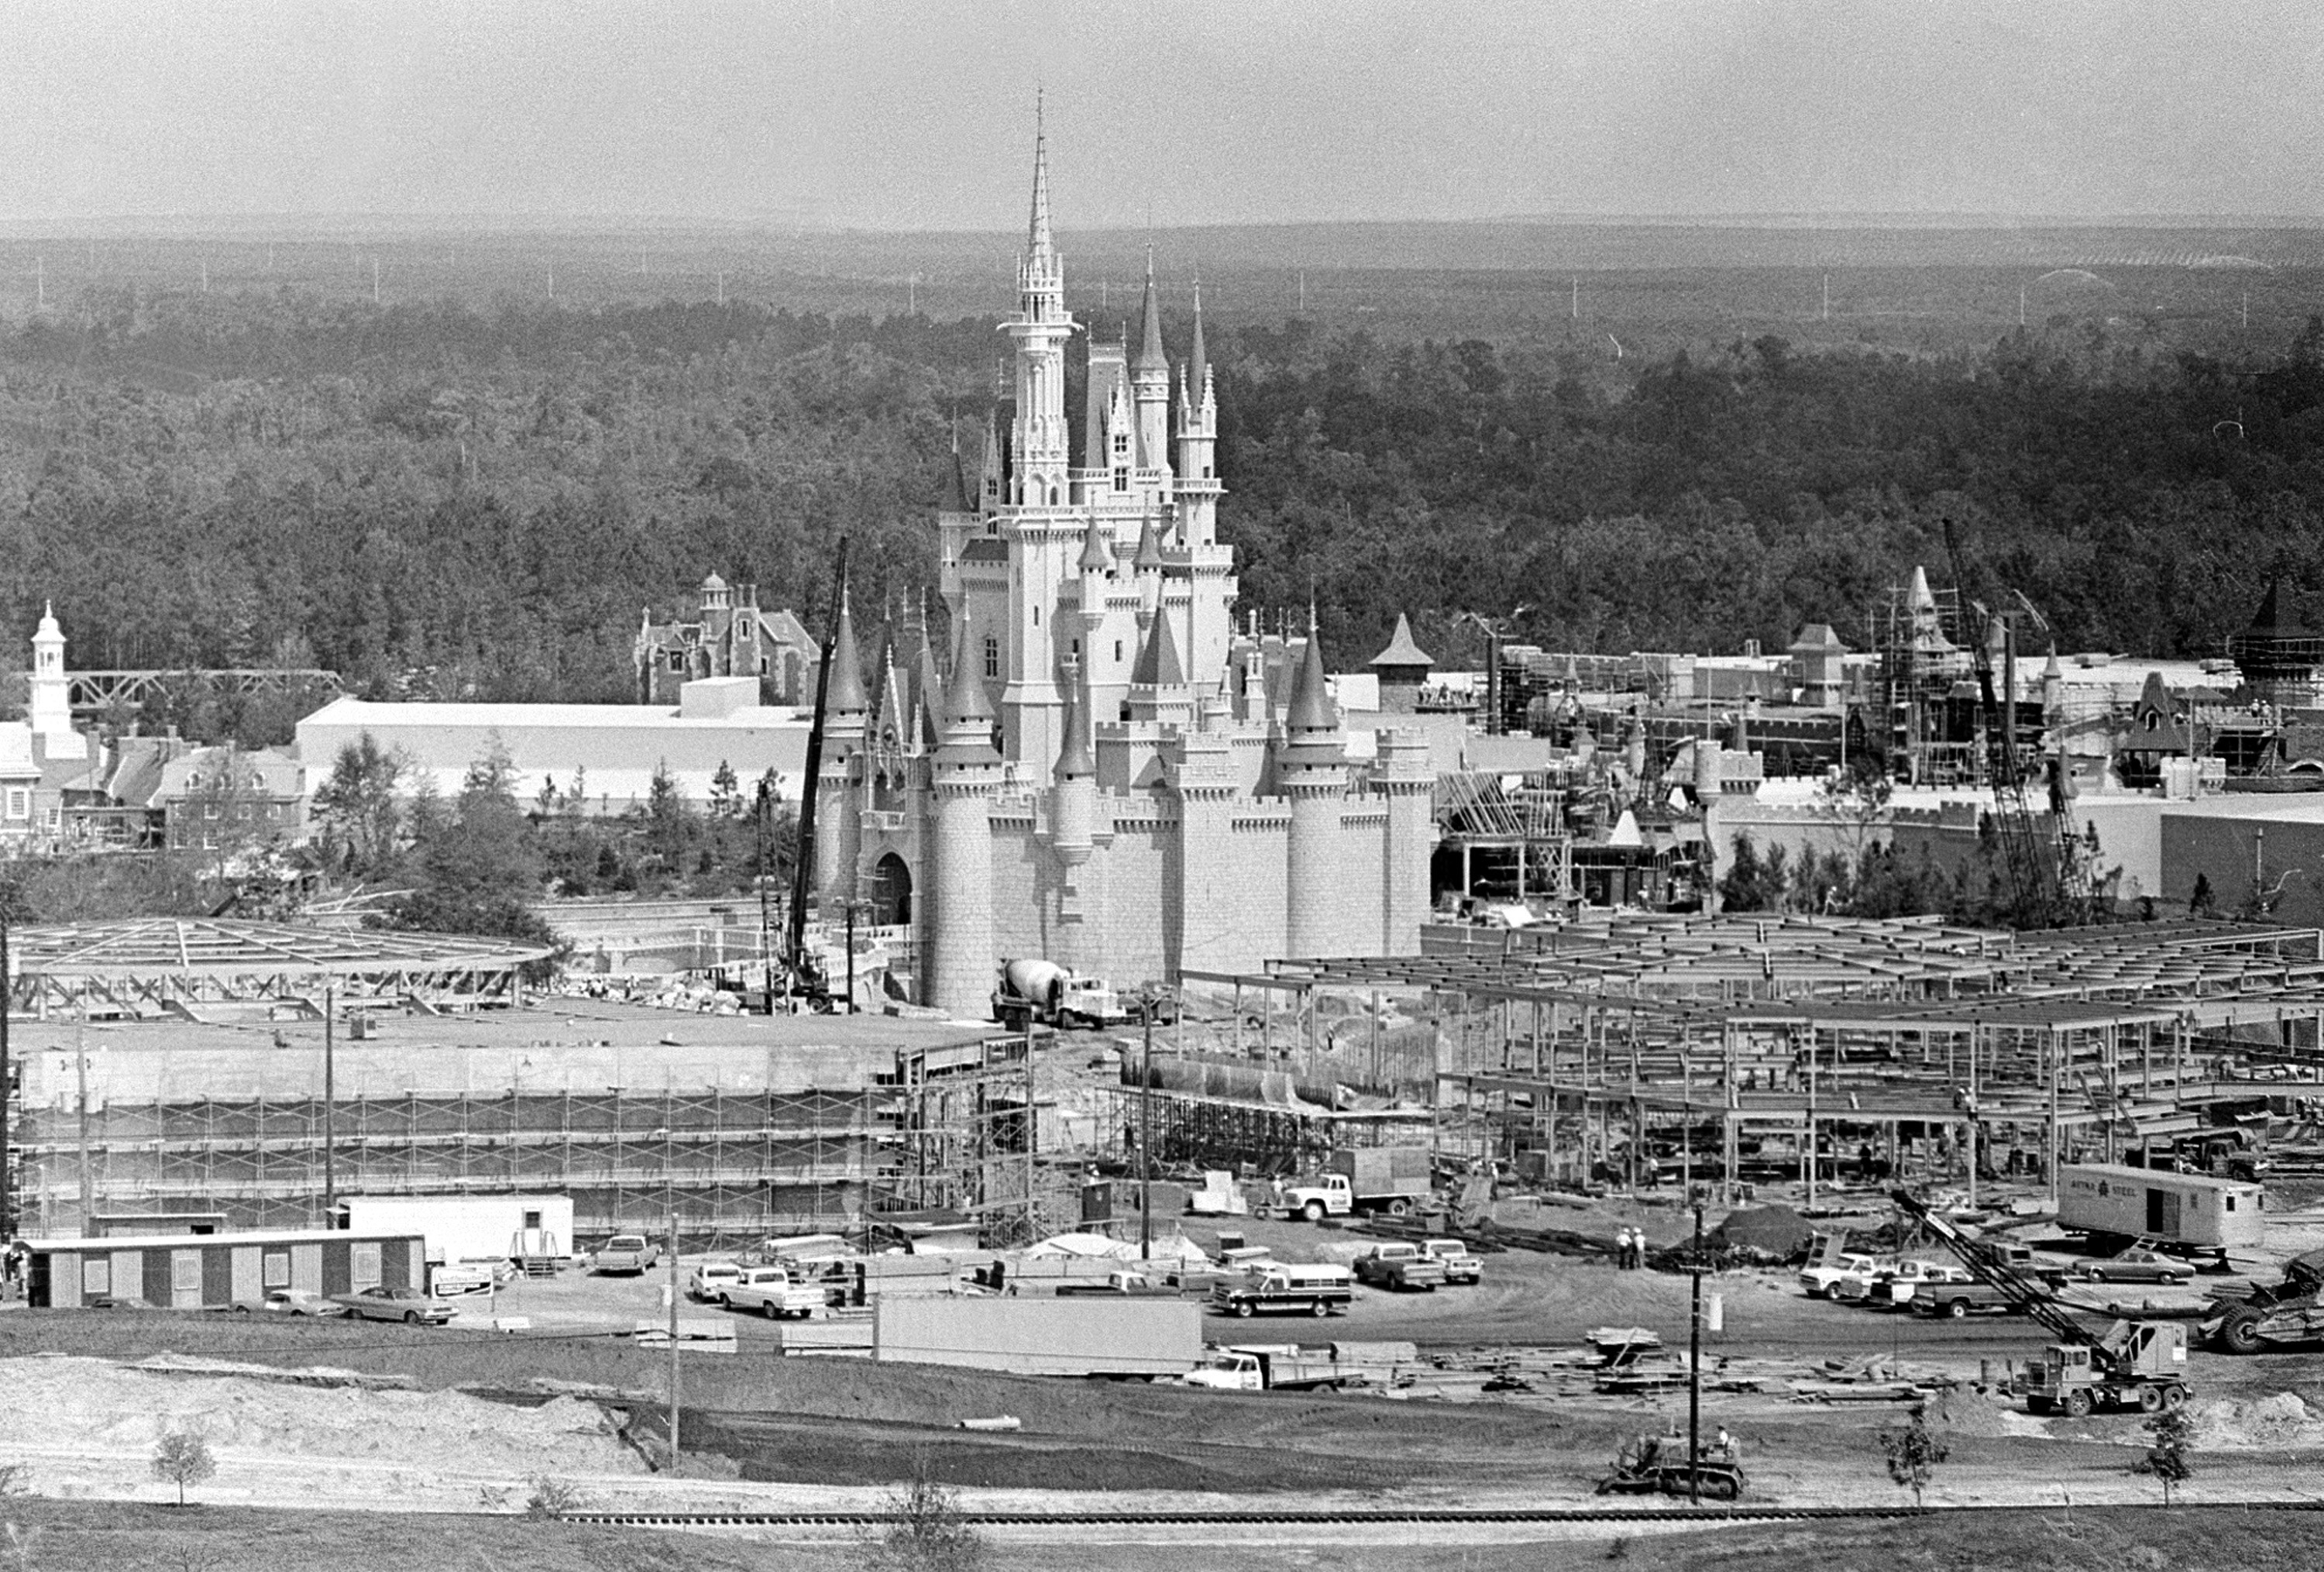 An open landscape view of construction site for Disney World with a castle in the middle